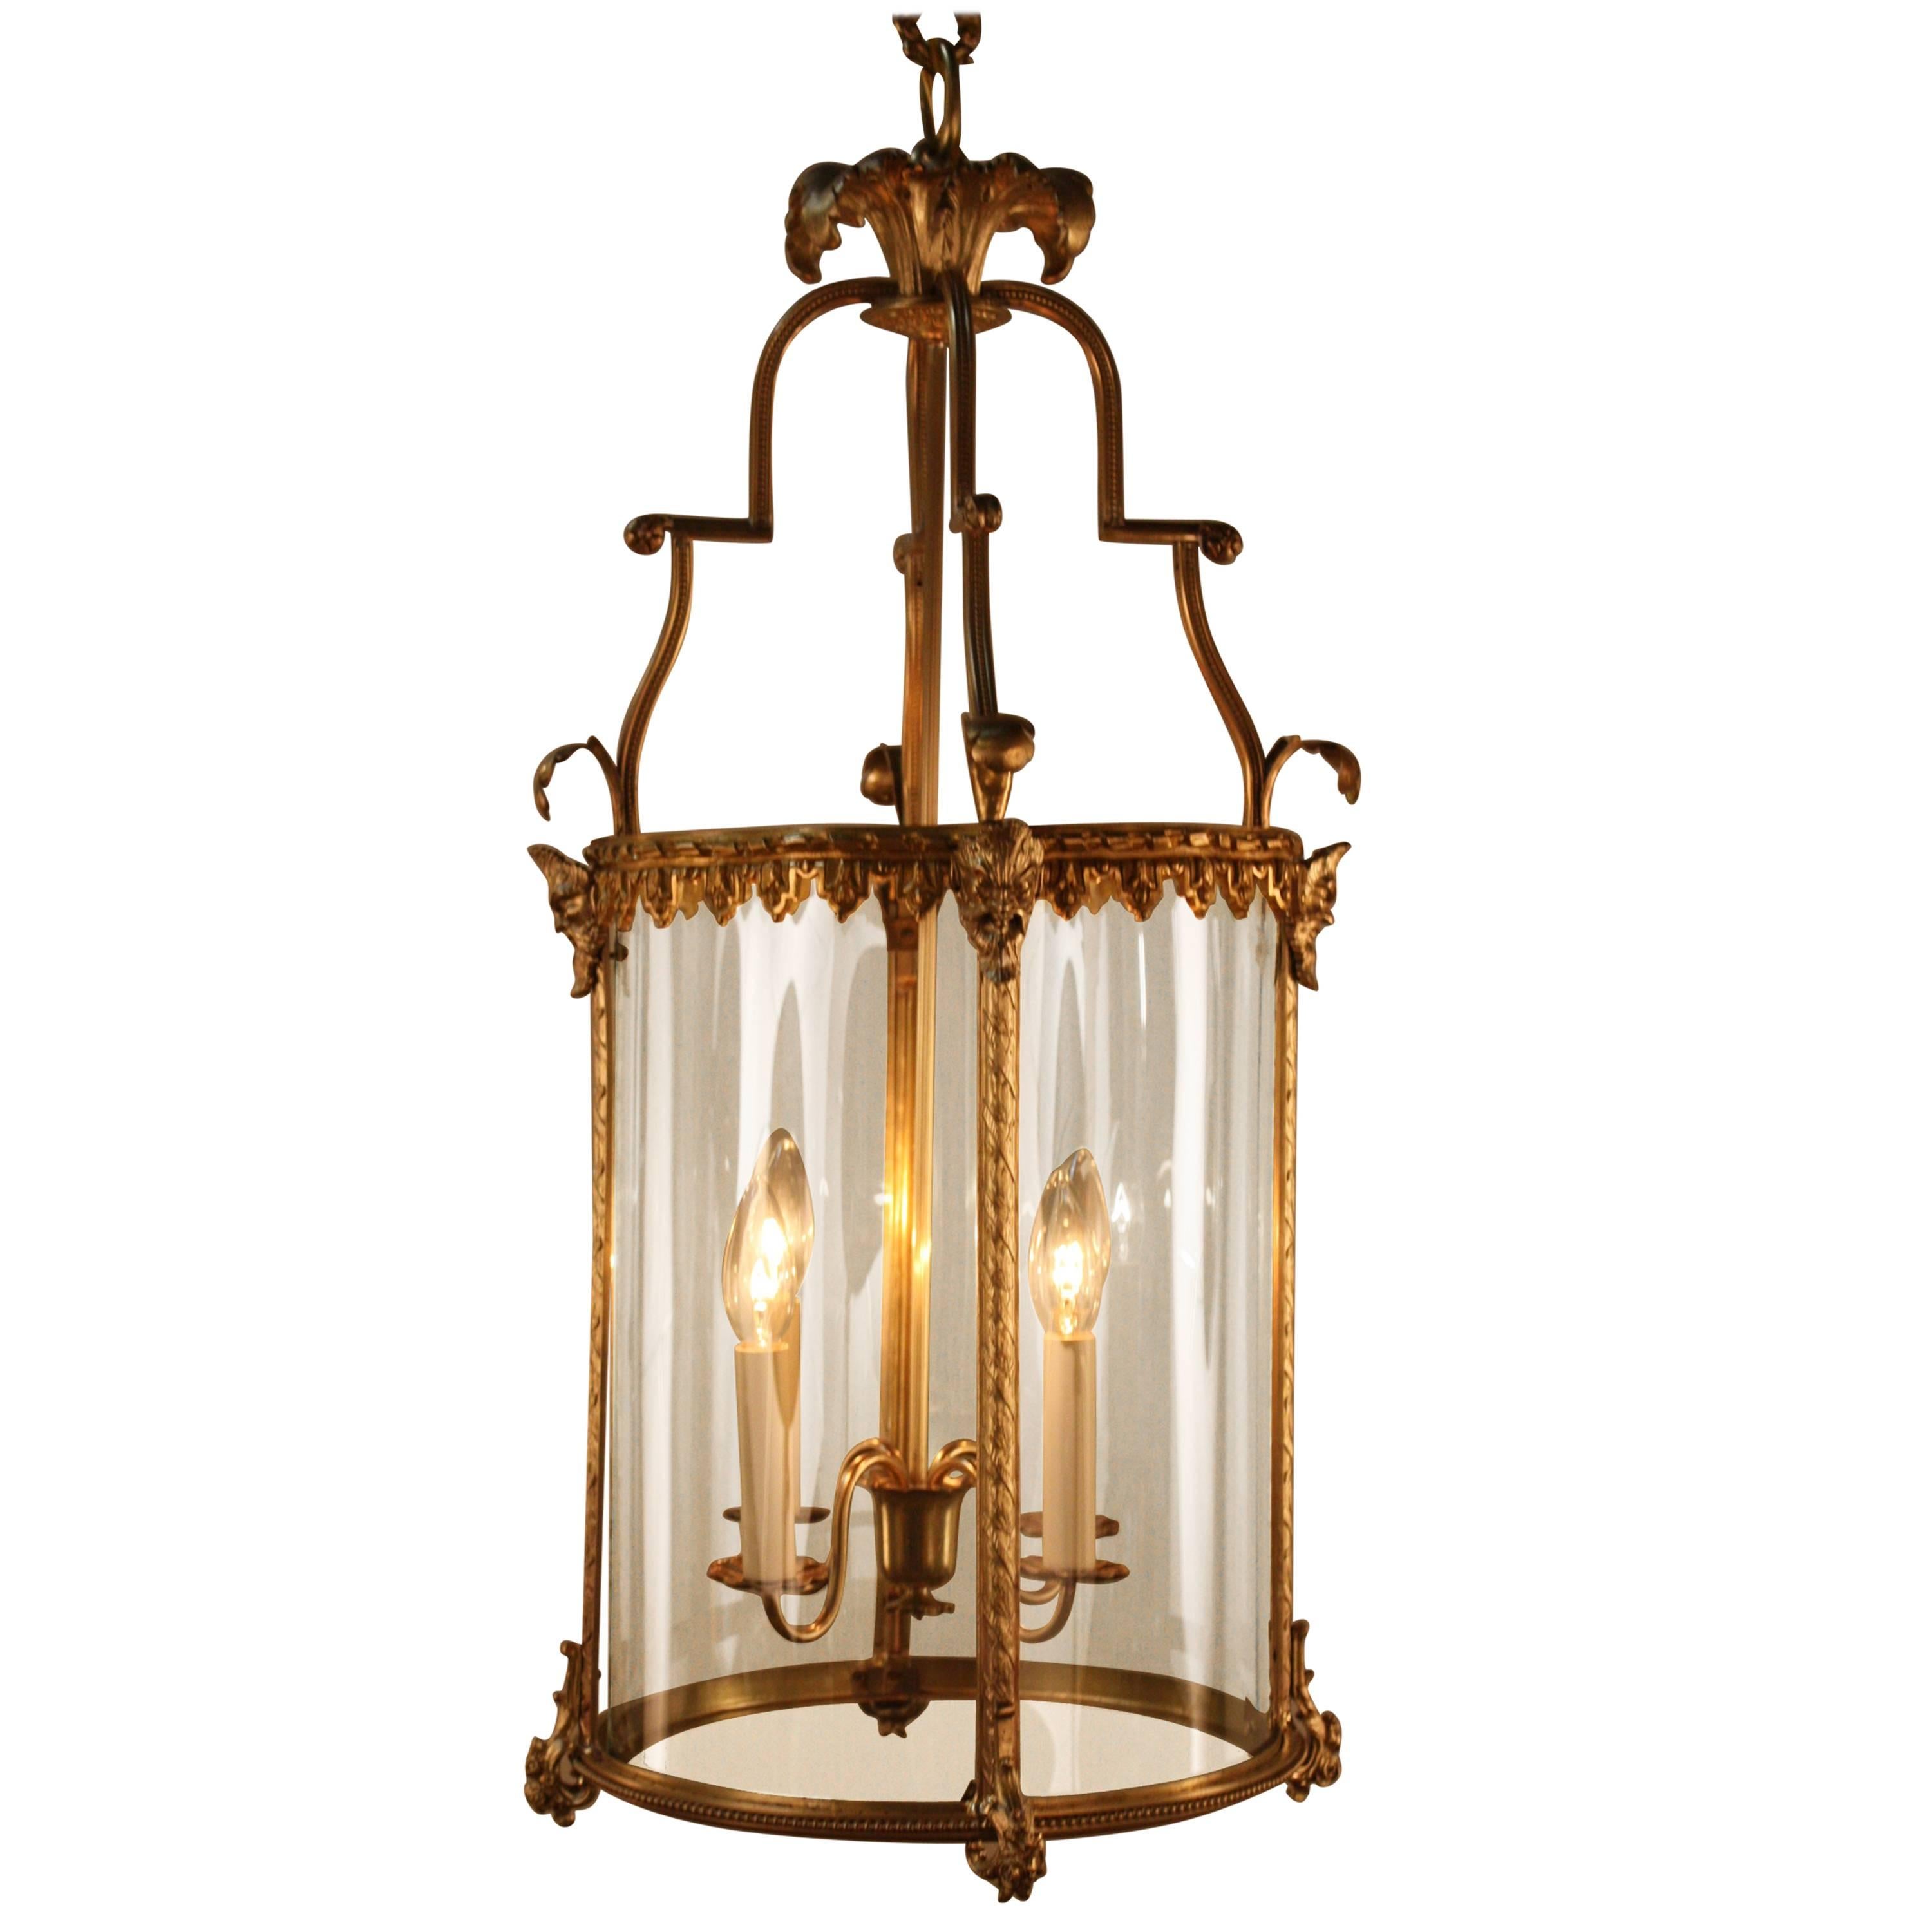 Early 20th Century French Bronze Four-Light Lantern